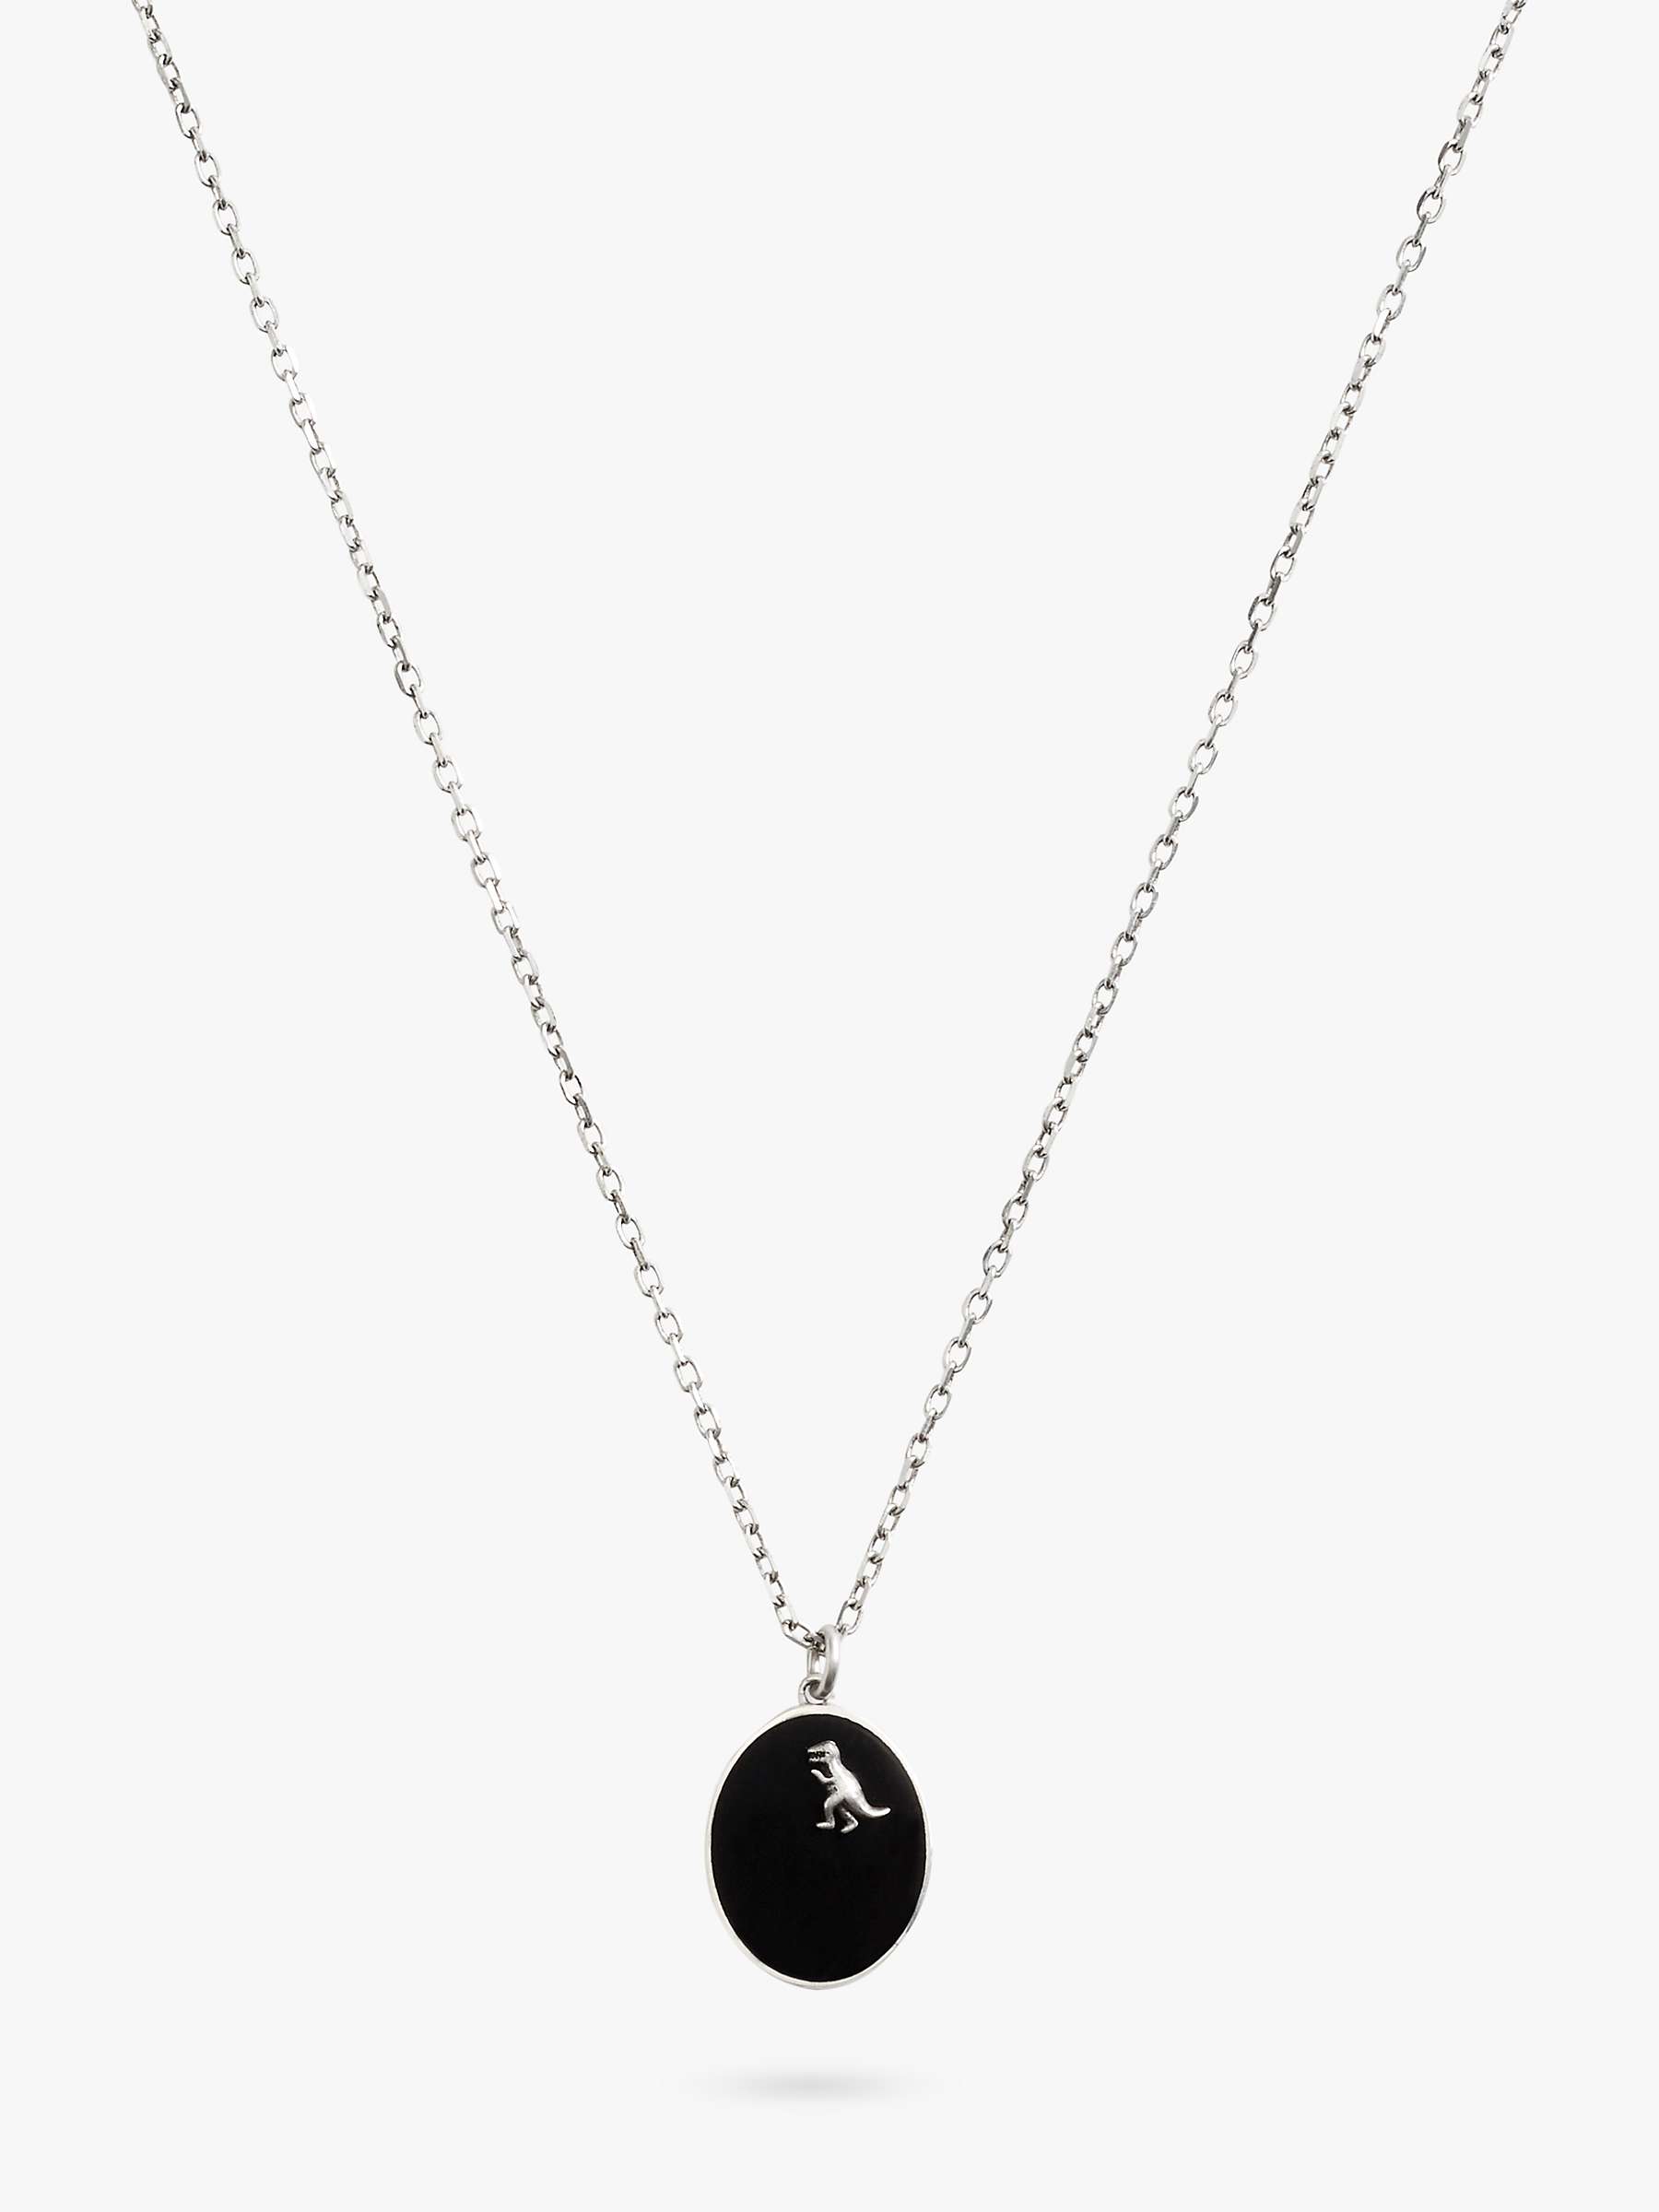 Buy Coach Rexy Dino Coin Pendant Necklace, Silver Online at johnlewis.com